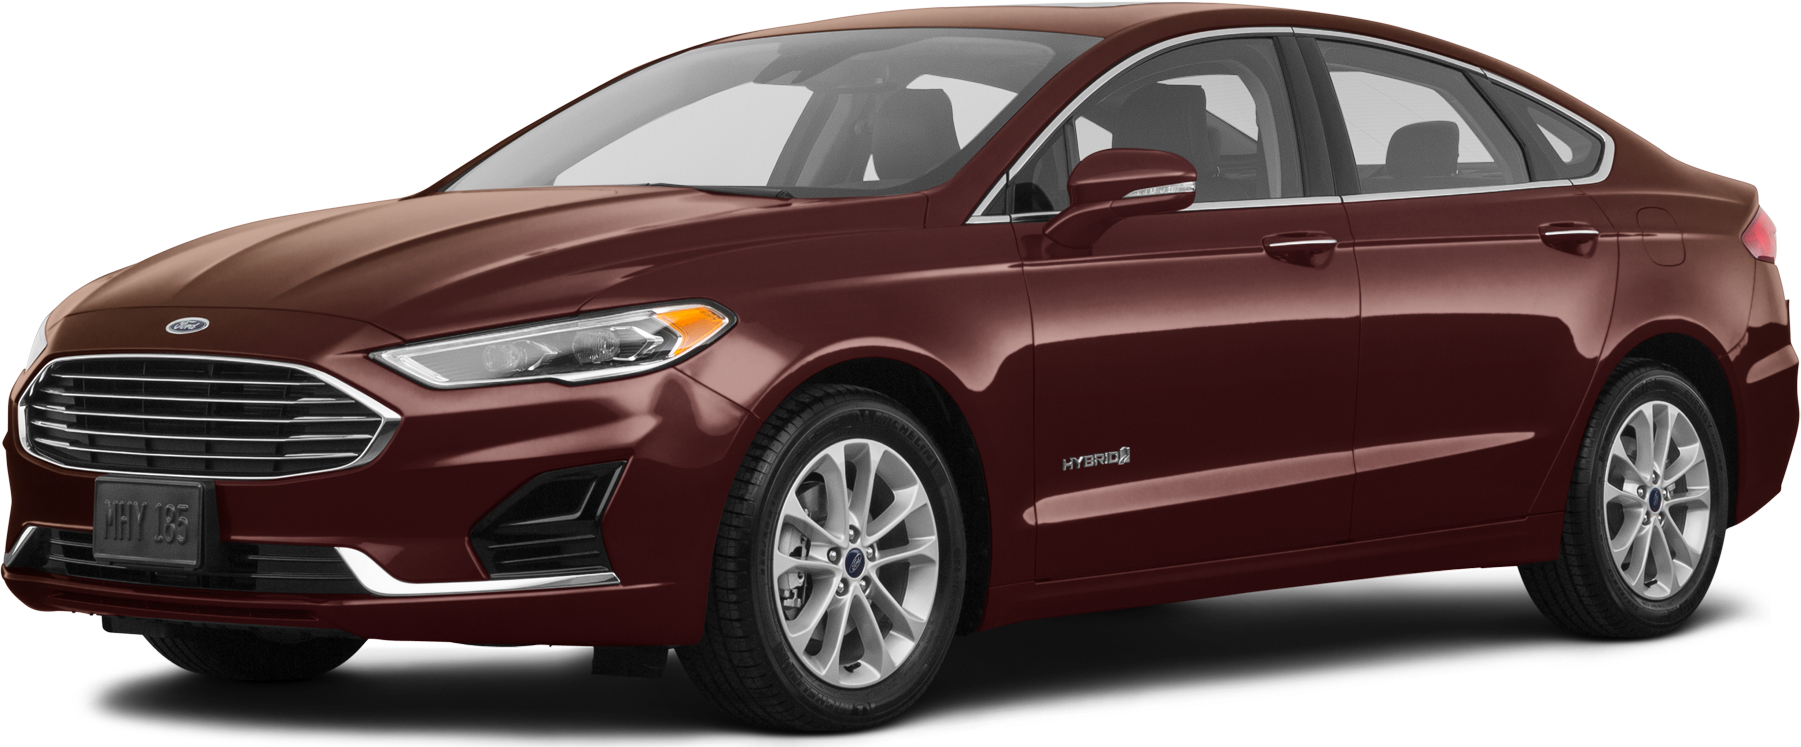 Burgundy Ford Fusion Hybrid Side View PNG image